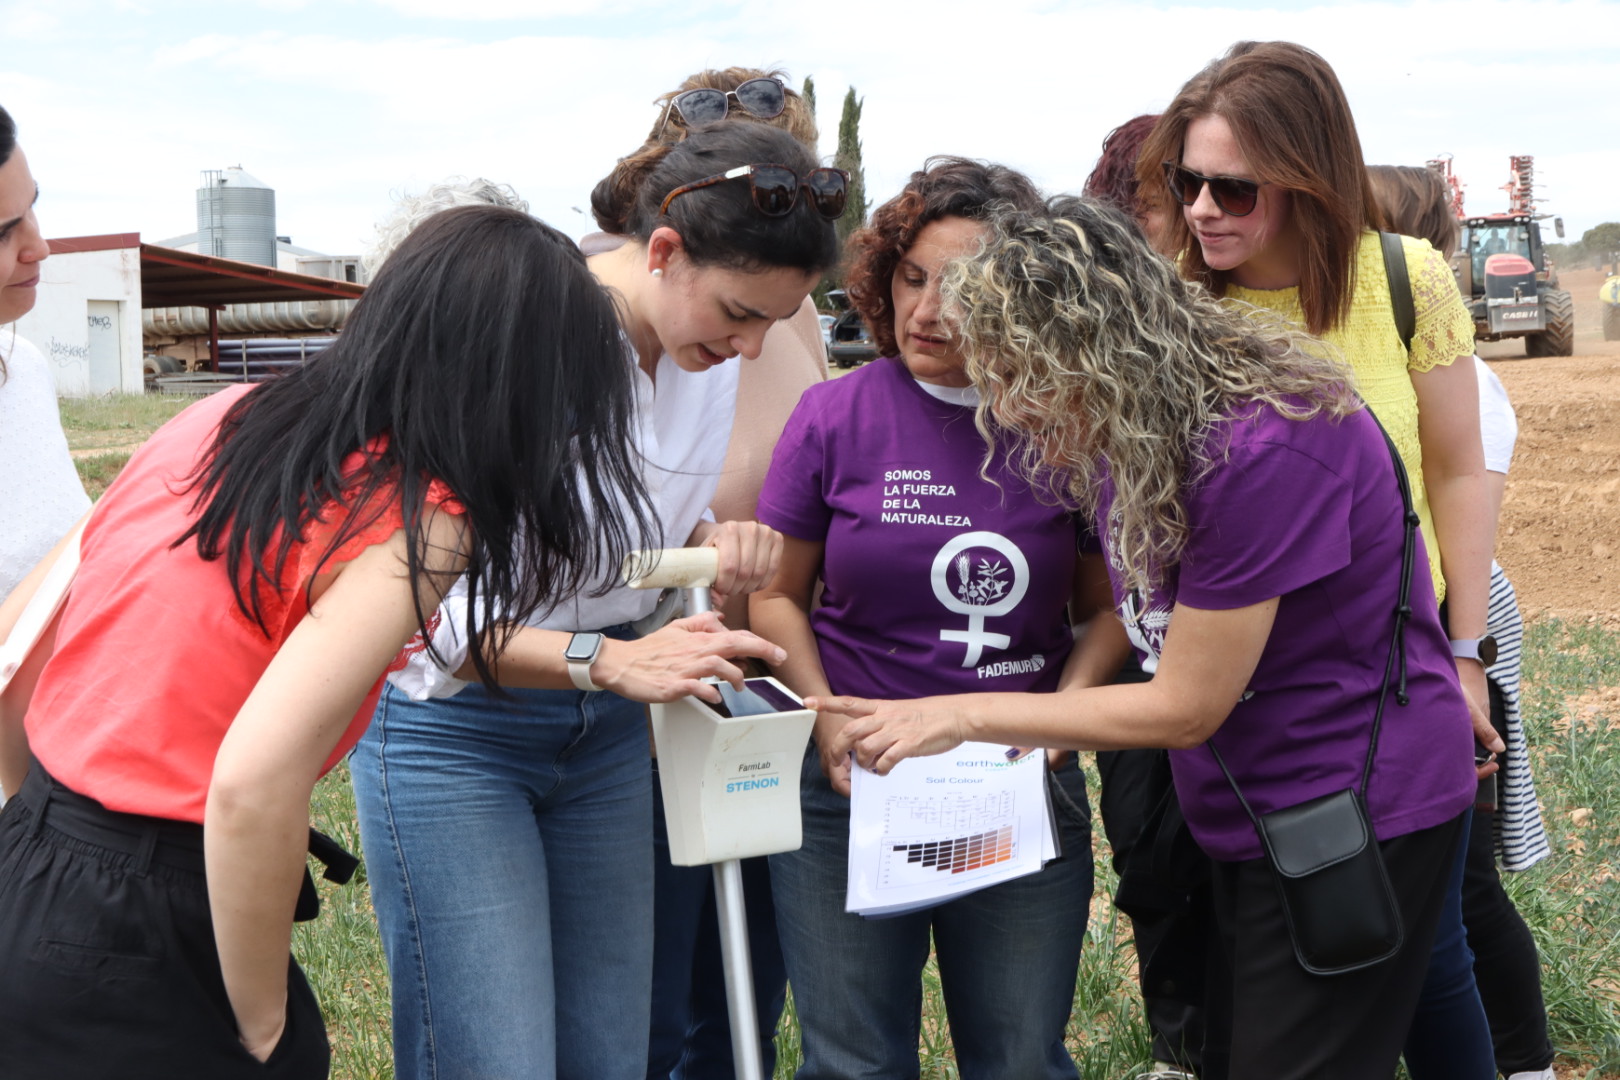 Women participating in the workshop on regenerative agriculture held in April in Lerma (Burgos).